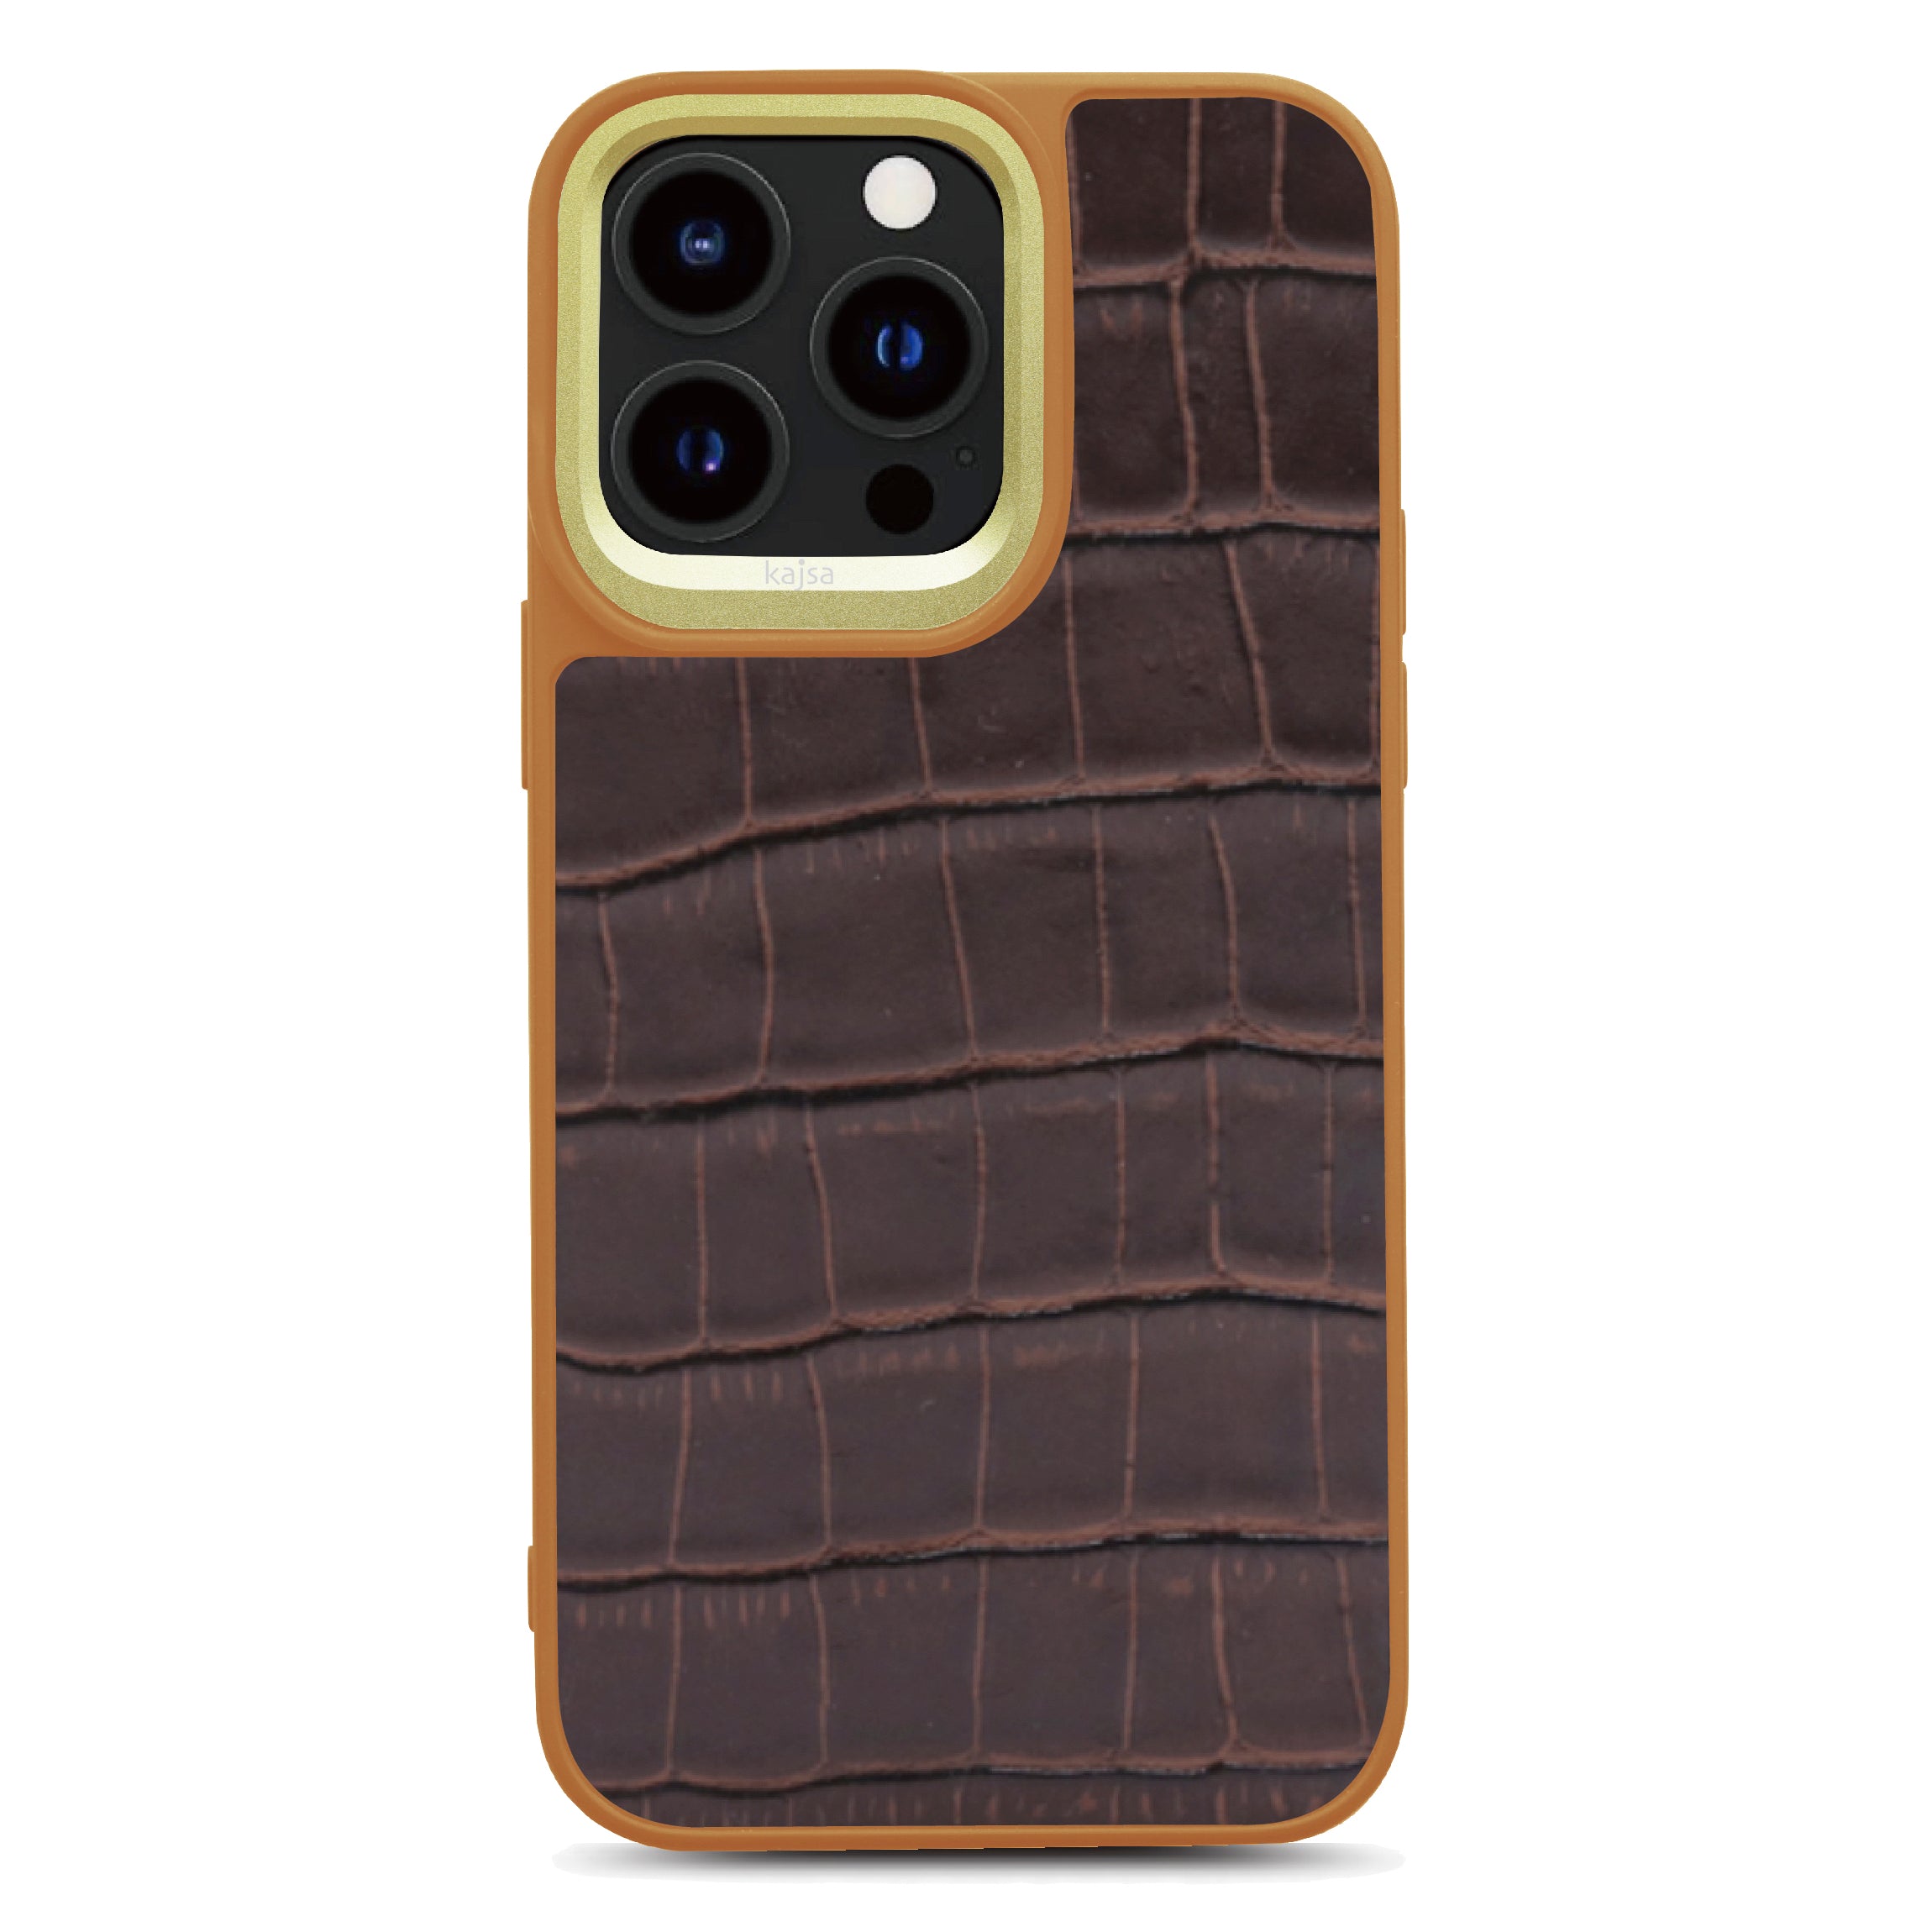 Neo Classic Collection - Genuine Croco Pattern Leather Back Case for iPhone 14-Phone Case- phone case - phone cases- phone cover- iphone cover- iphone case- iphone cases- leather case- leather cases- DIYCASE - custom case - leather cover - hand strap case - croco pattern case - snake pattern case - carbon fiber phone case - phone case brand - unique phone case - high quality - phone case brand - protective case - buy phone case hong kong - online buy phone case - iphone‎手機殼 - 客製化手機殼 - samsung ‎手機殼 - 香港手機殼 -